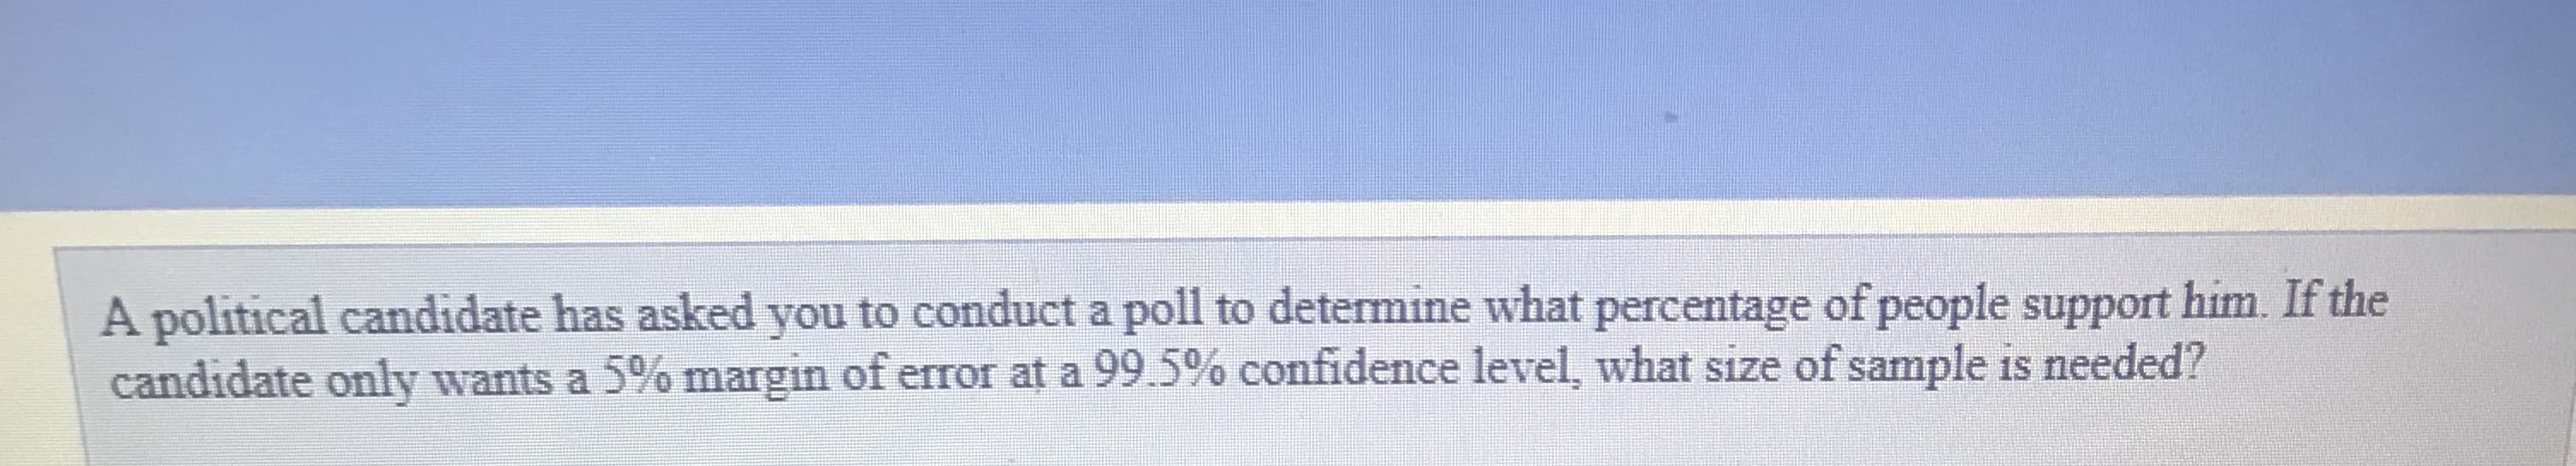 A political candidate has asked you to conduct a poll to determine what percentage of people support him. If the
candidate only wants a 5% margin of error at a 99.5% confidence level, what size of sample is needed?
